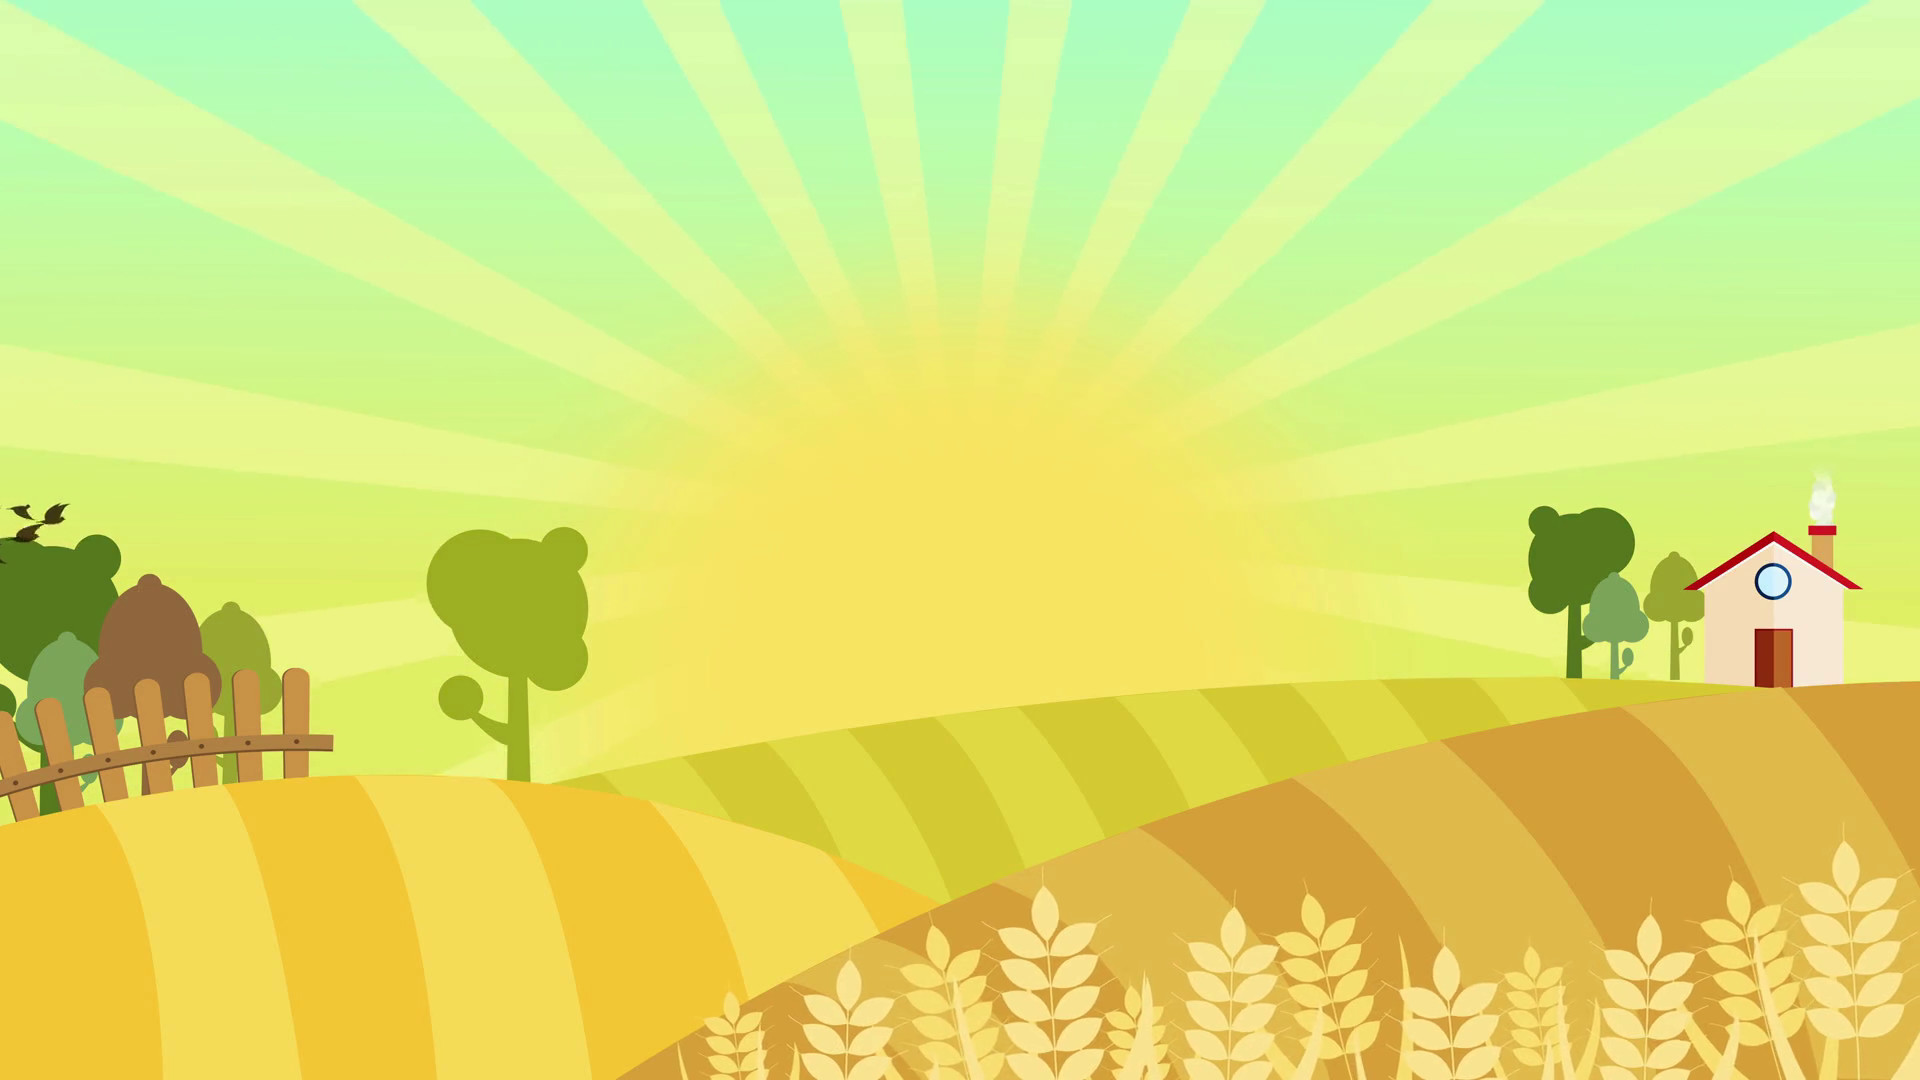 1920x1080 Nice cartoon animation of colorful farm Background seamless loop with space  for your text or logo. wheat filed over sunburst full hd and 4k.  illustration of ...